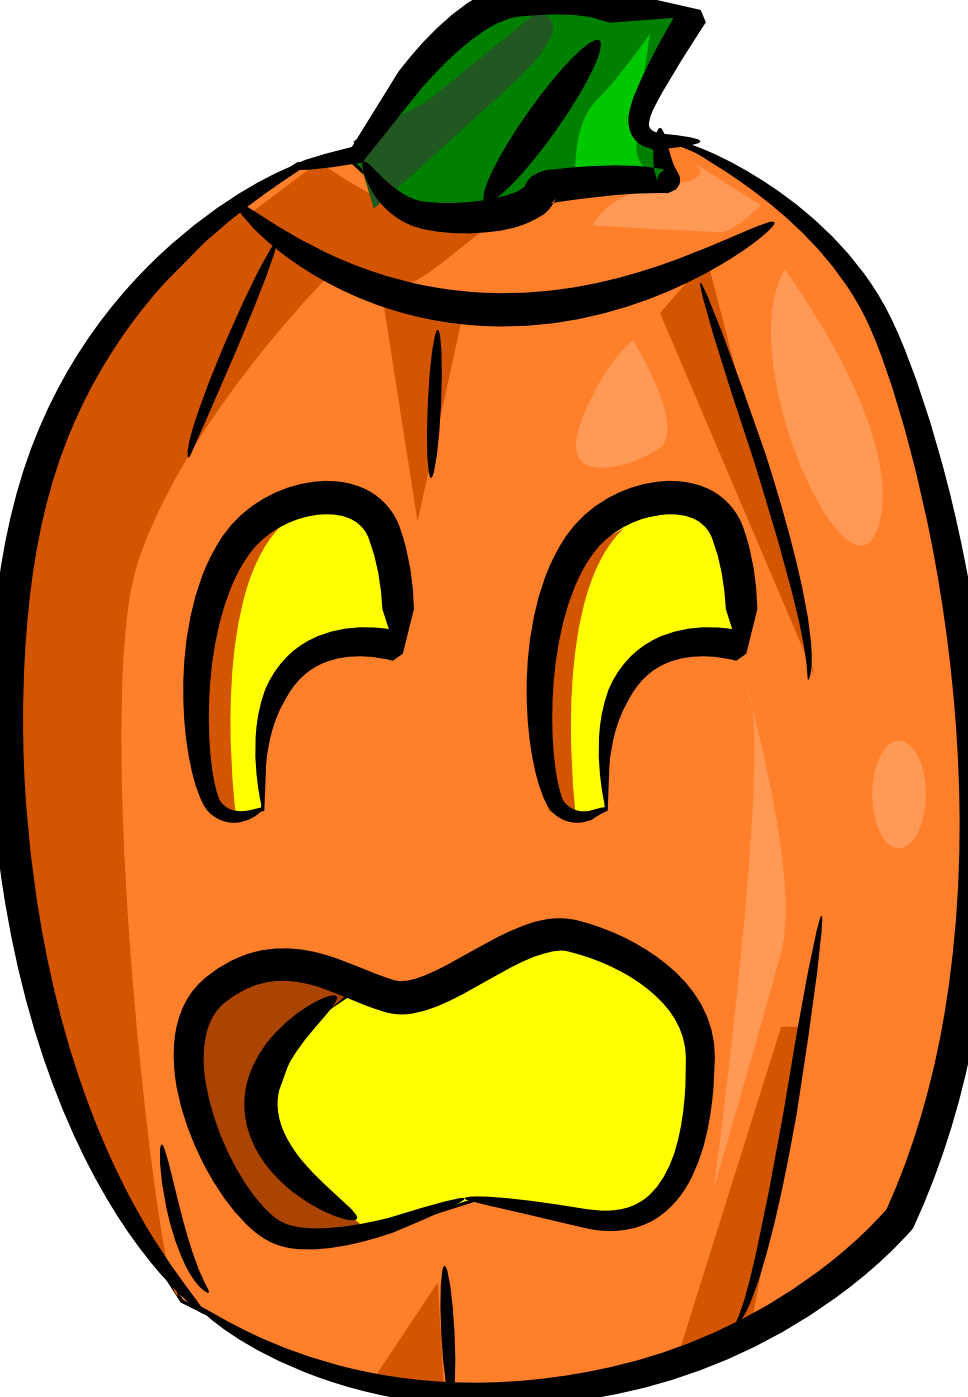 Scary surprised free collection. Faces clipart jack o lantern